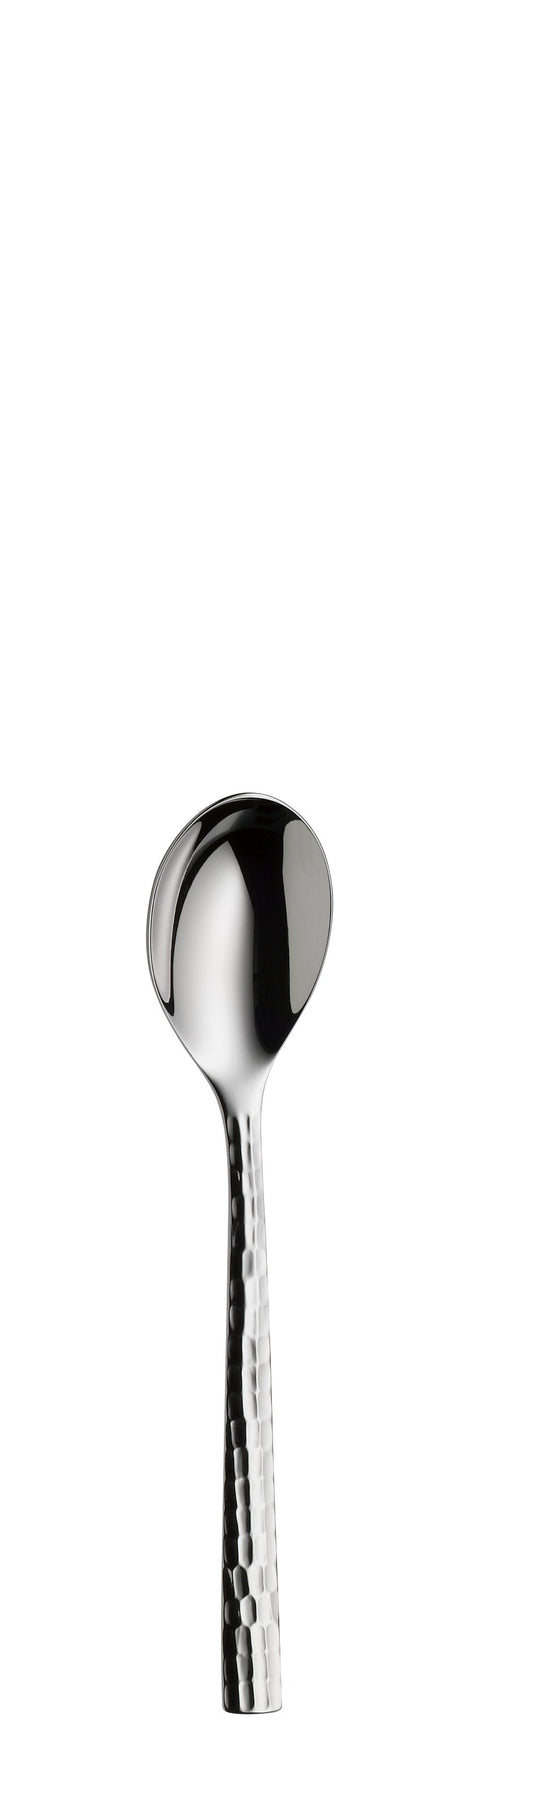 Coffee spoon LENISTA silver plated 137mm